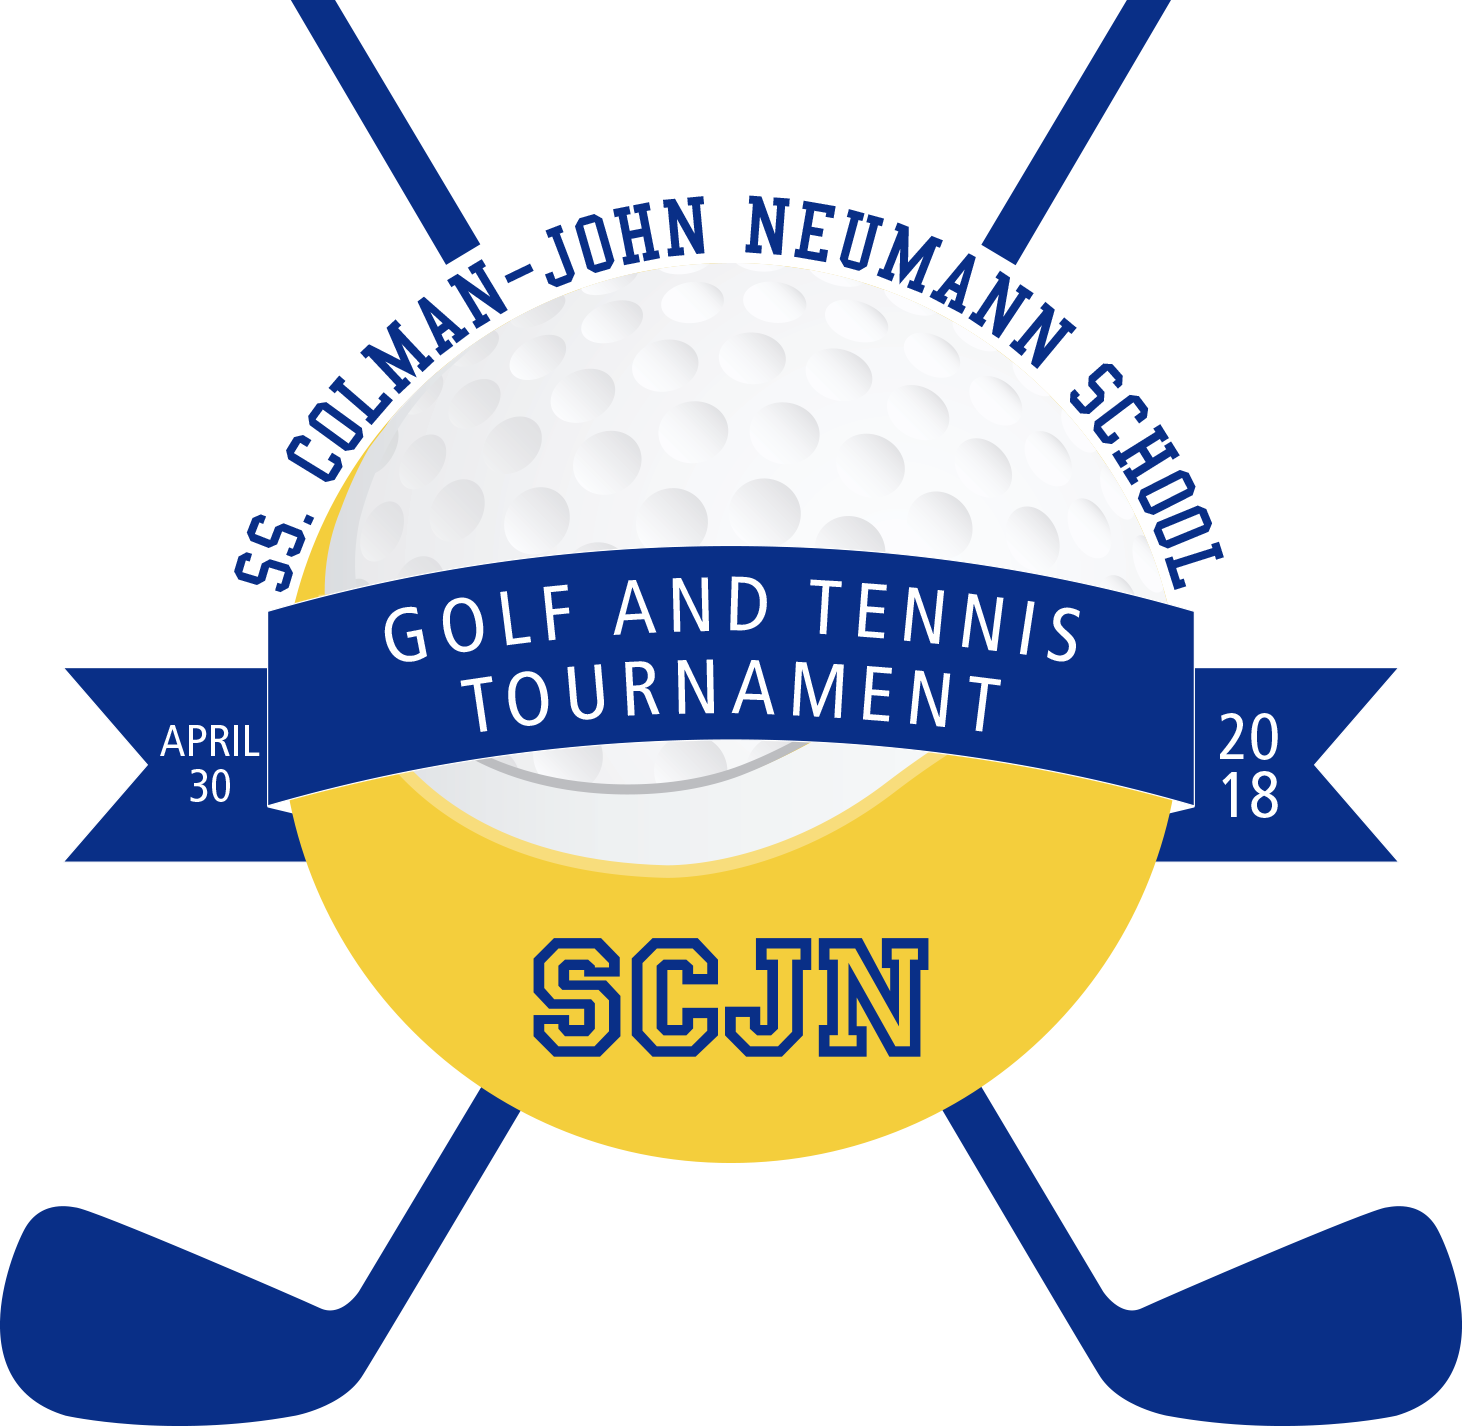 Scjn Golf And Tennis Outing - Honor Society The Band (1462x1426)